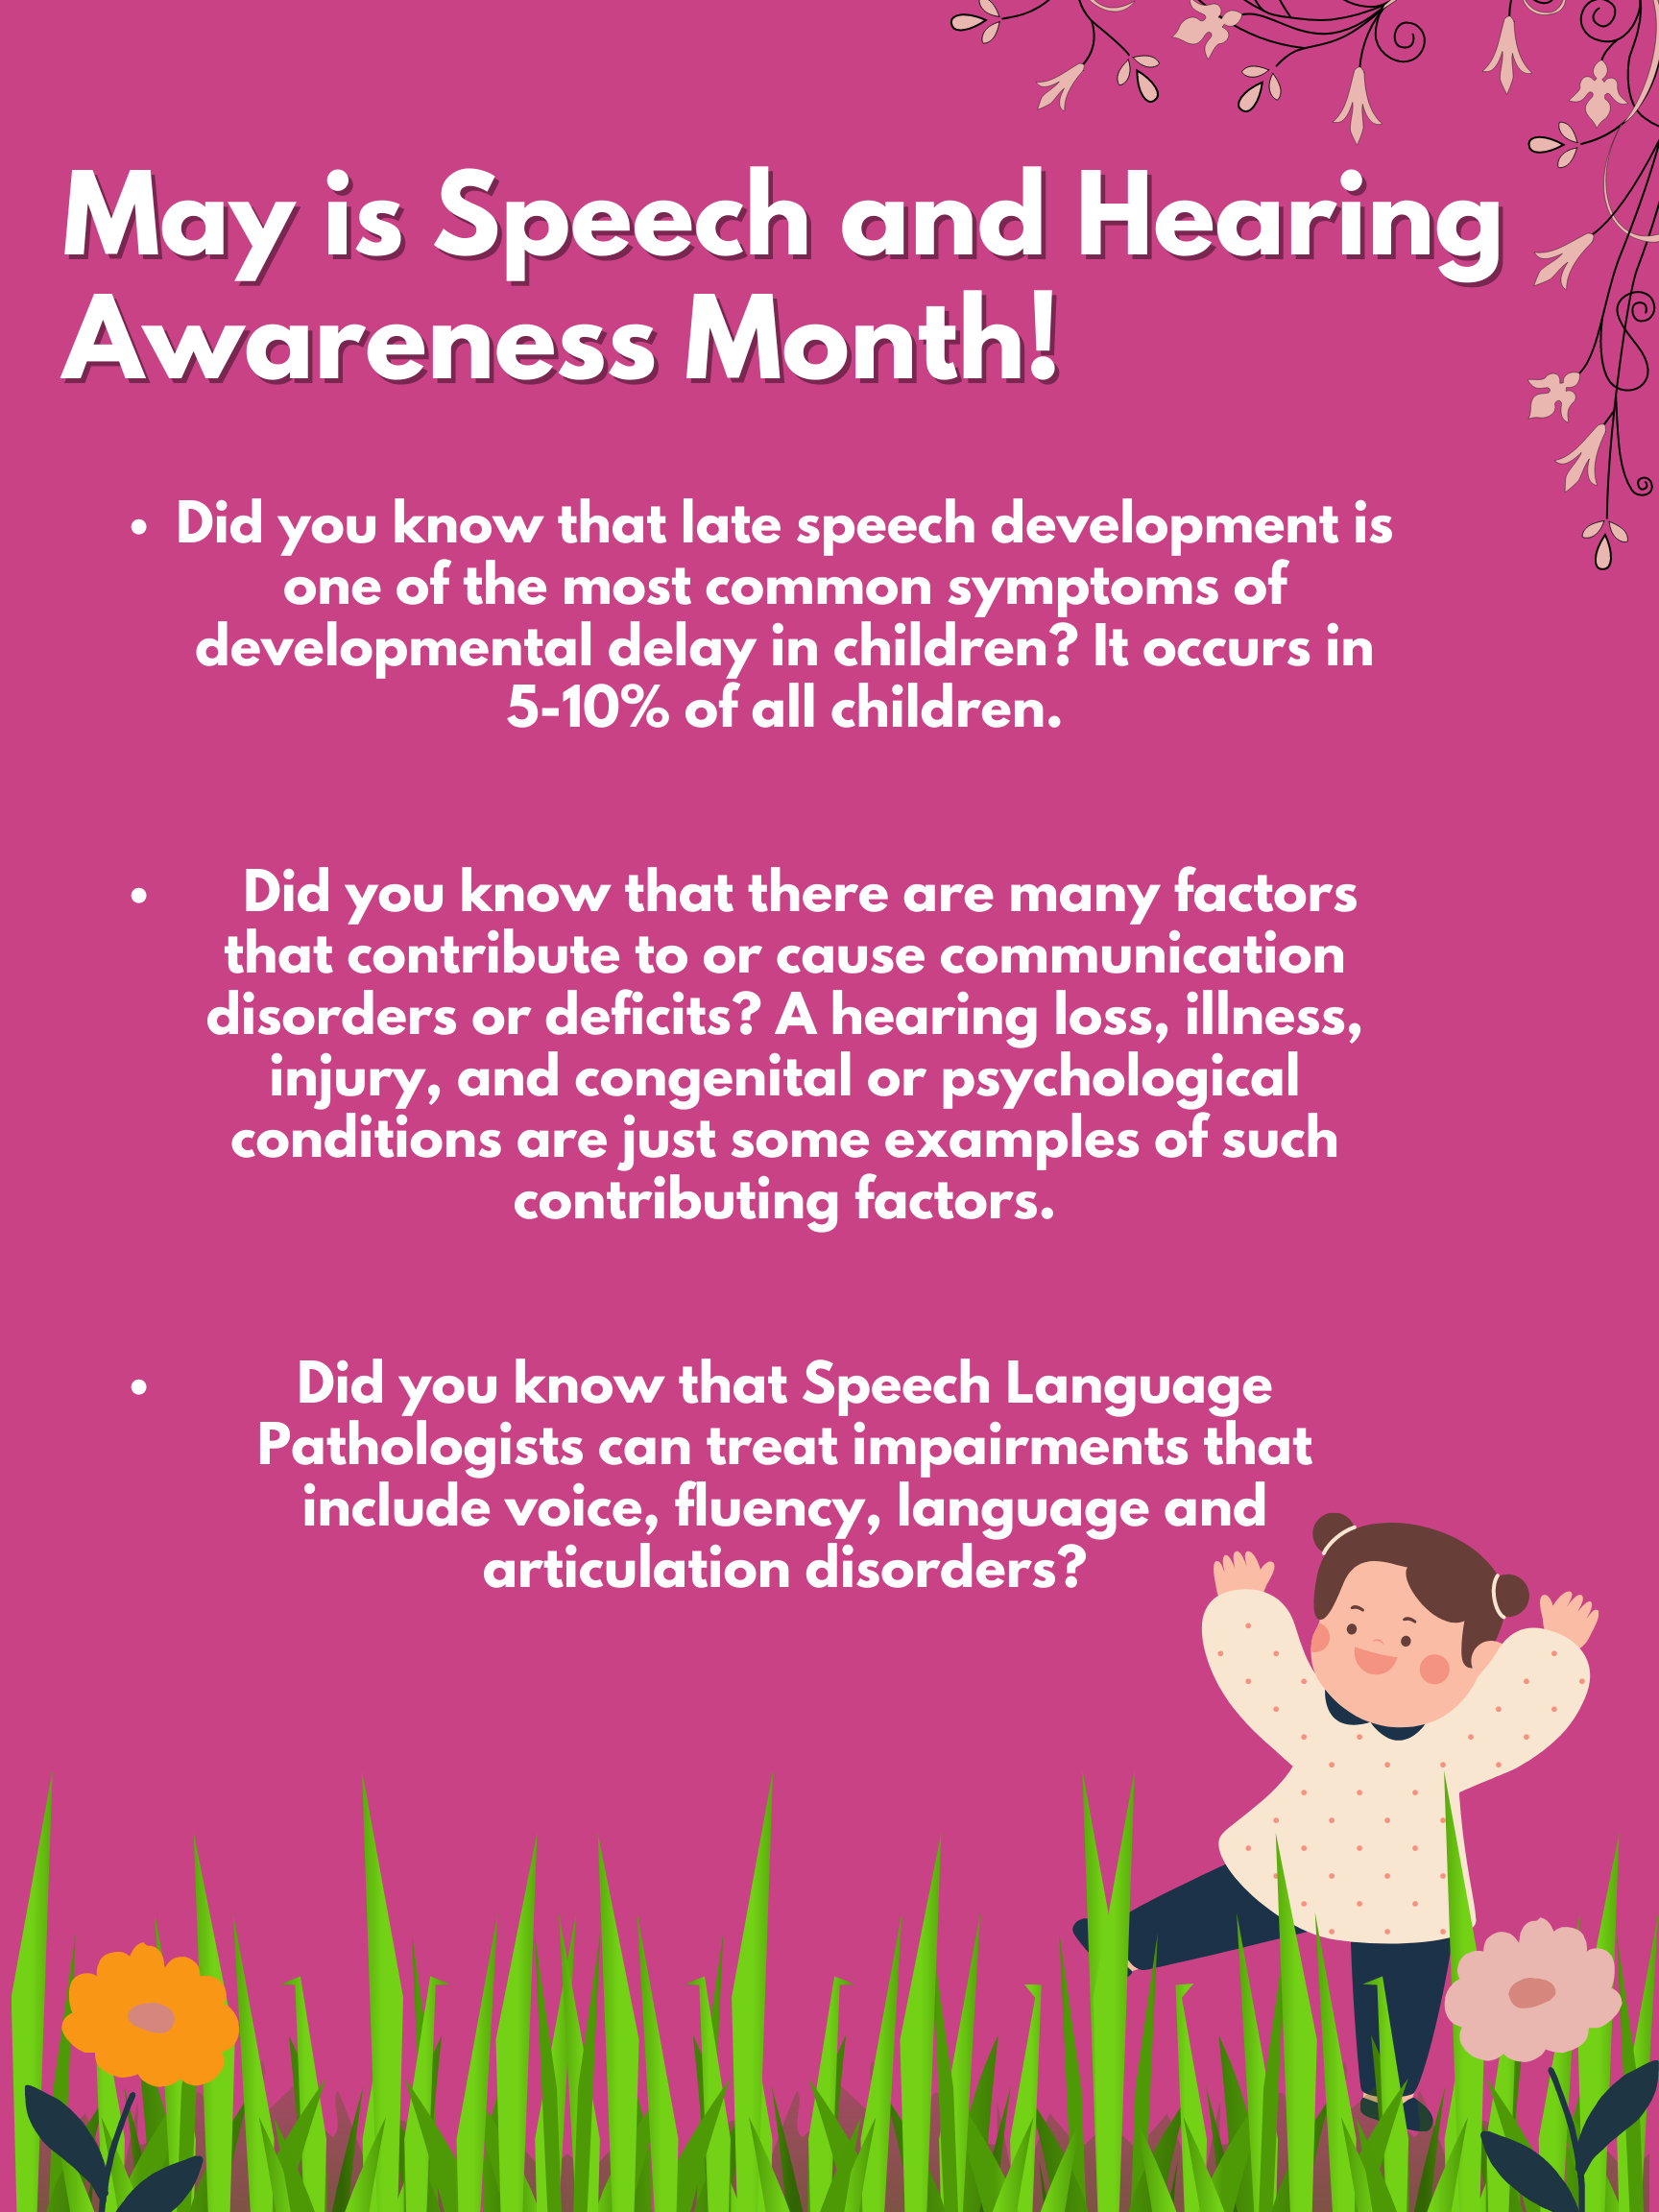 Copy of Week 1-May is Speech and Hearing Awareness Month.png